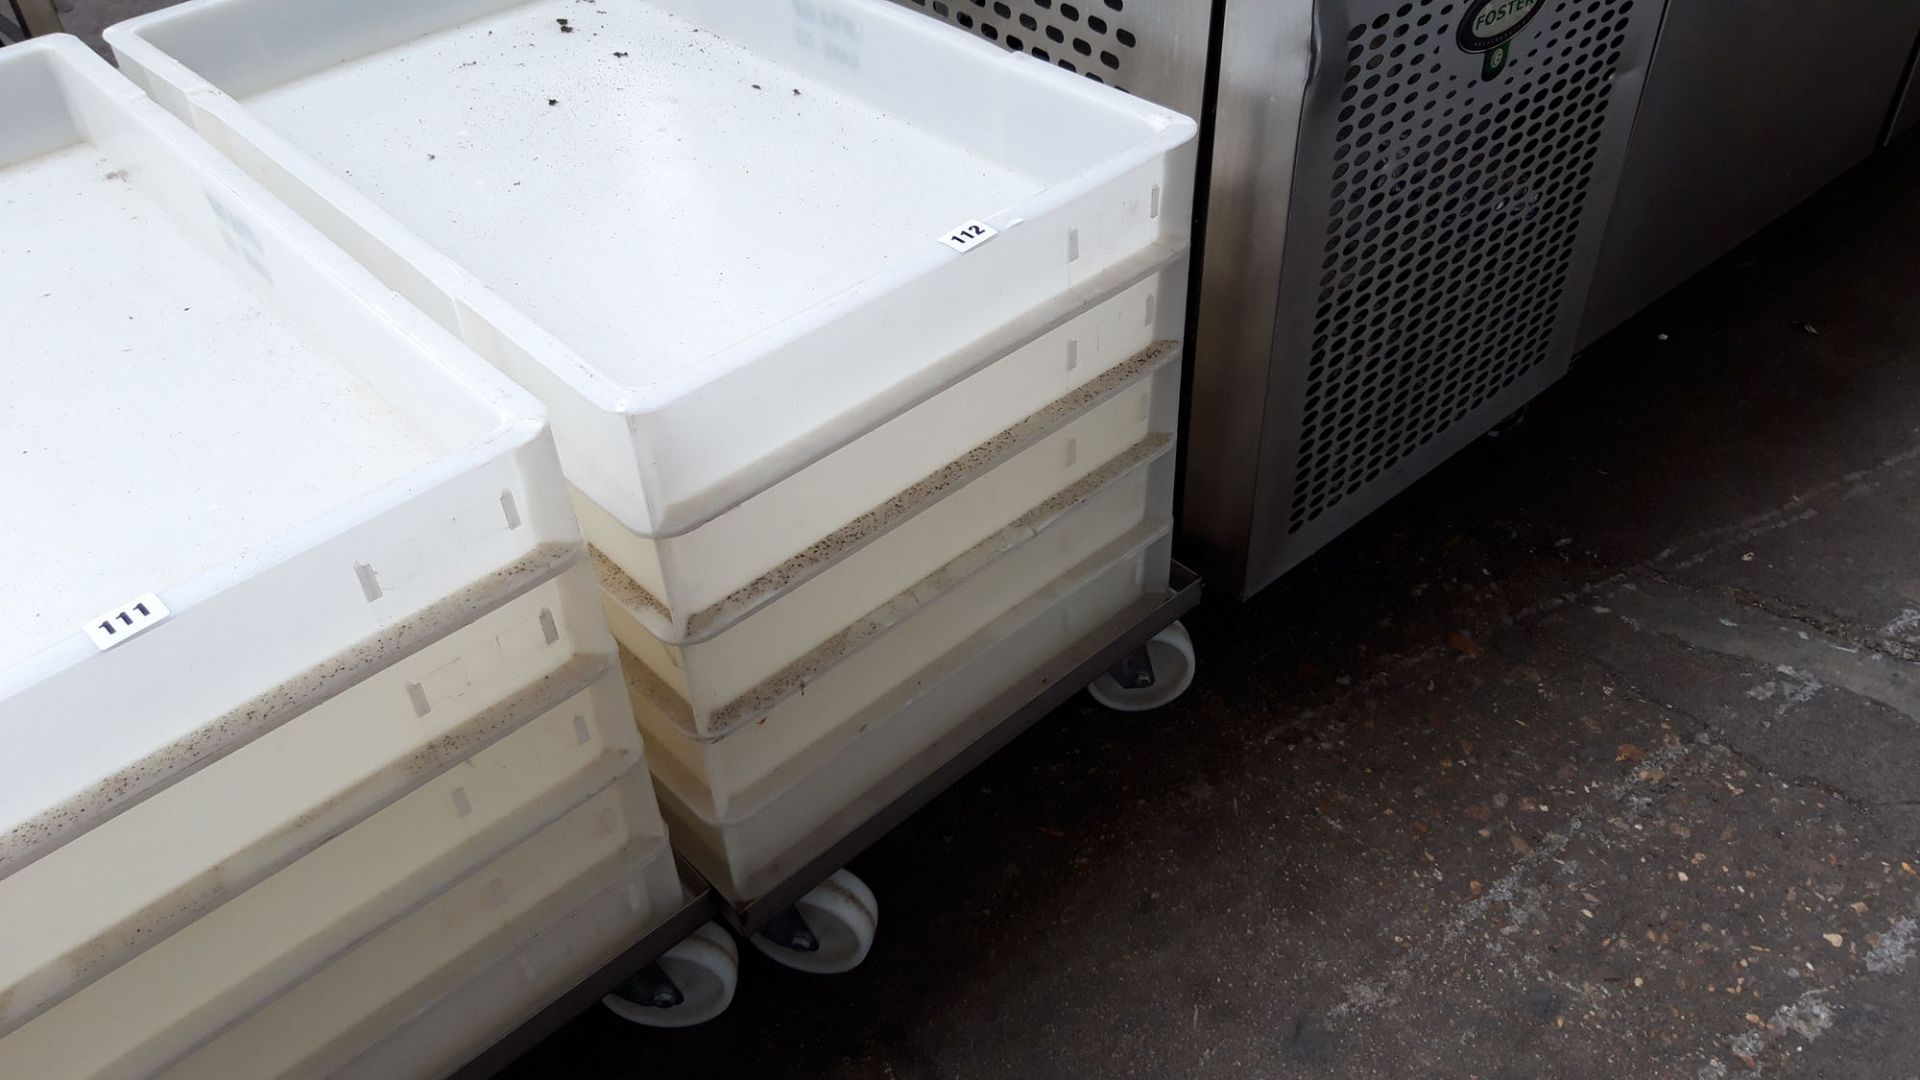 Stack of 5 76cm x 45cm dough trays on a mobile stainless steel trolley